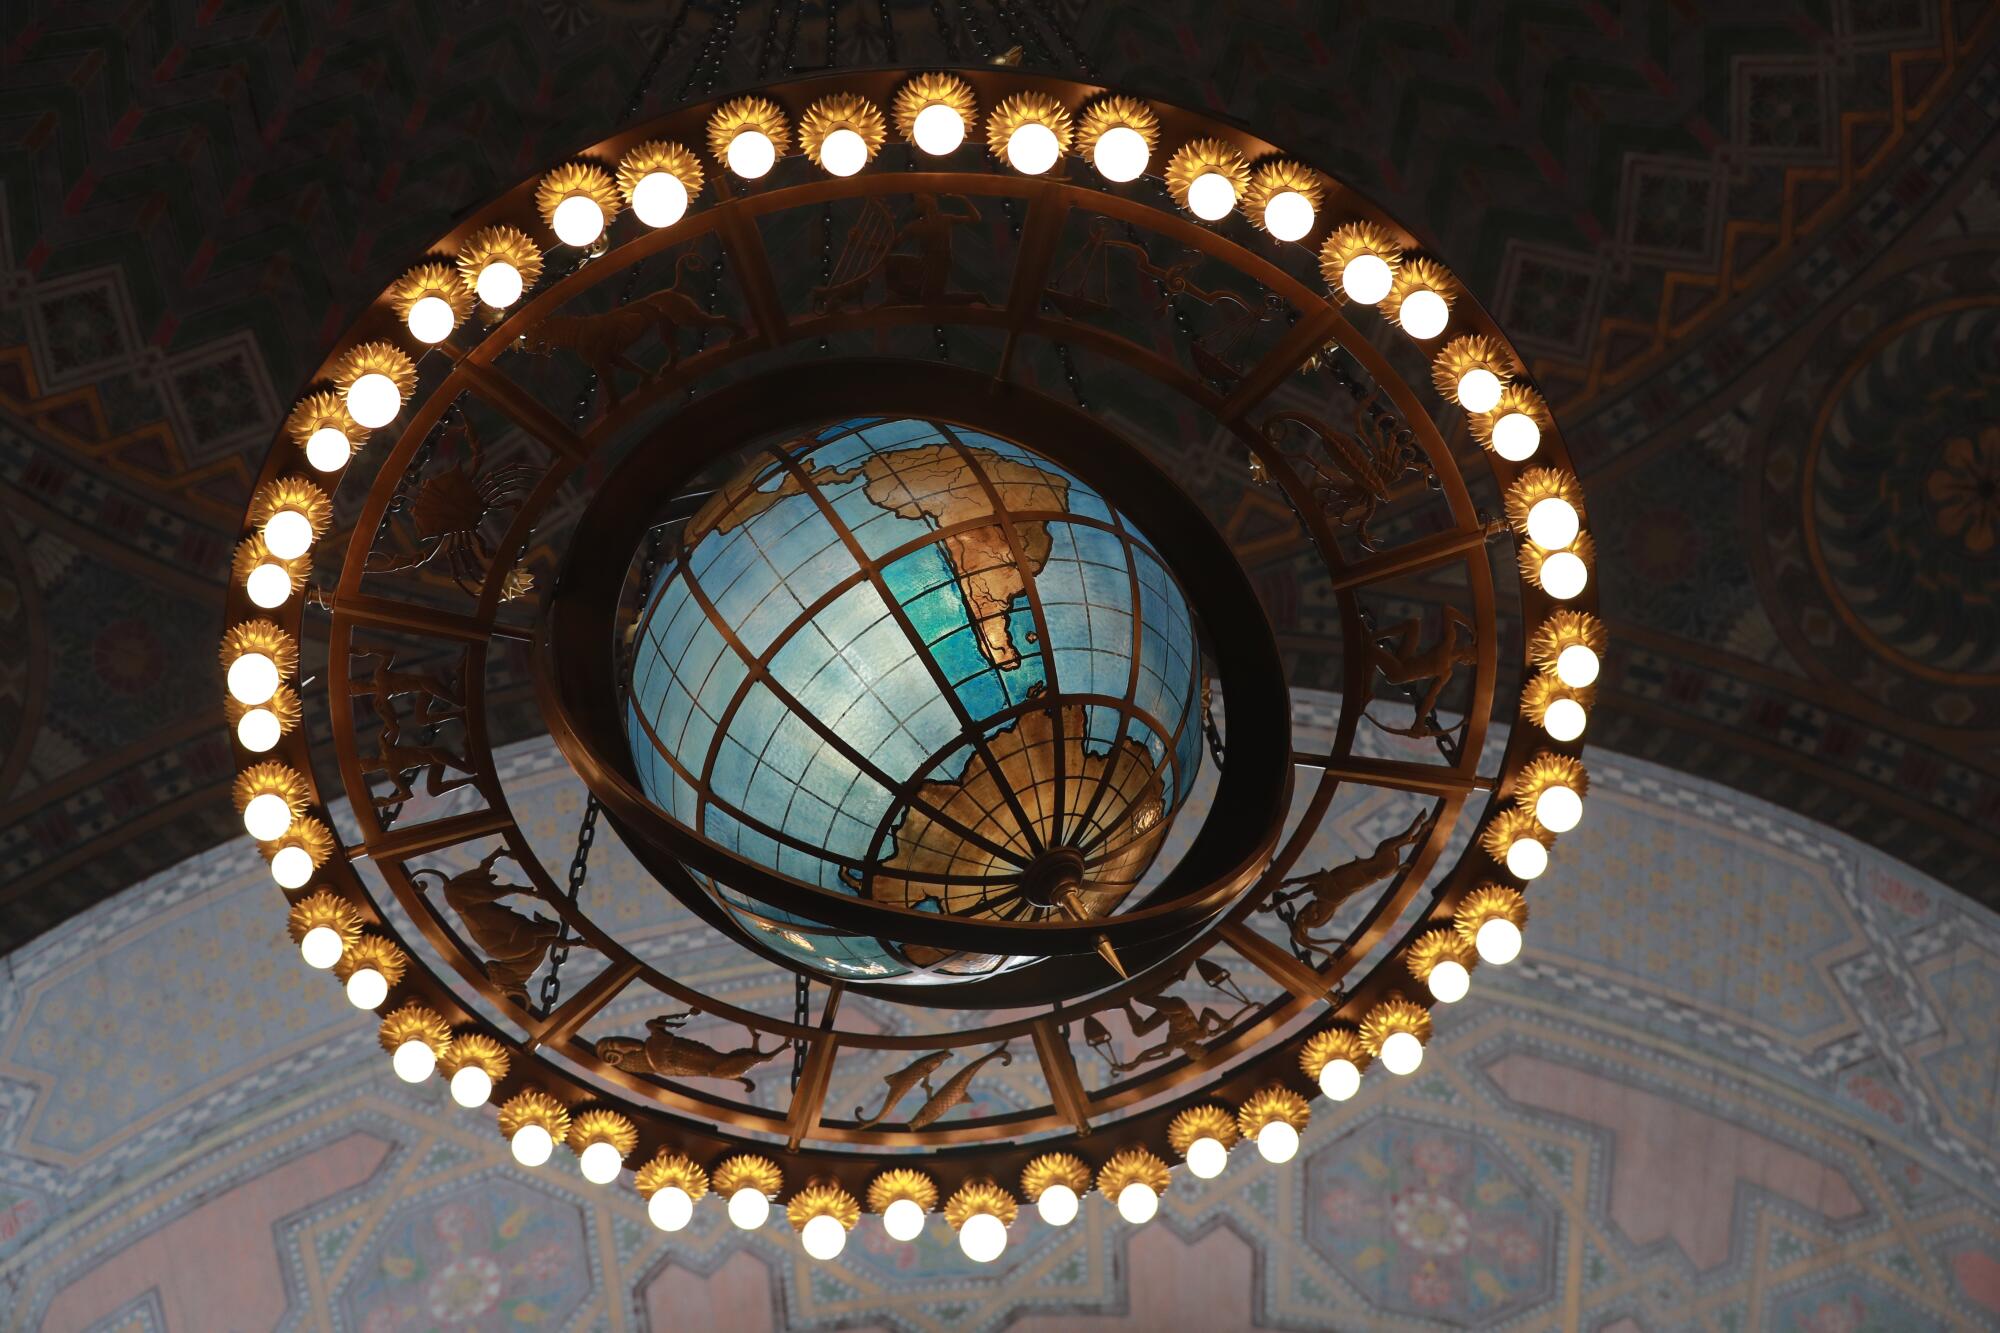 A view of a globe chandelier in the rotunda of the Los Angeles Central Library.